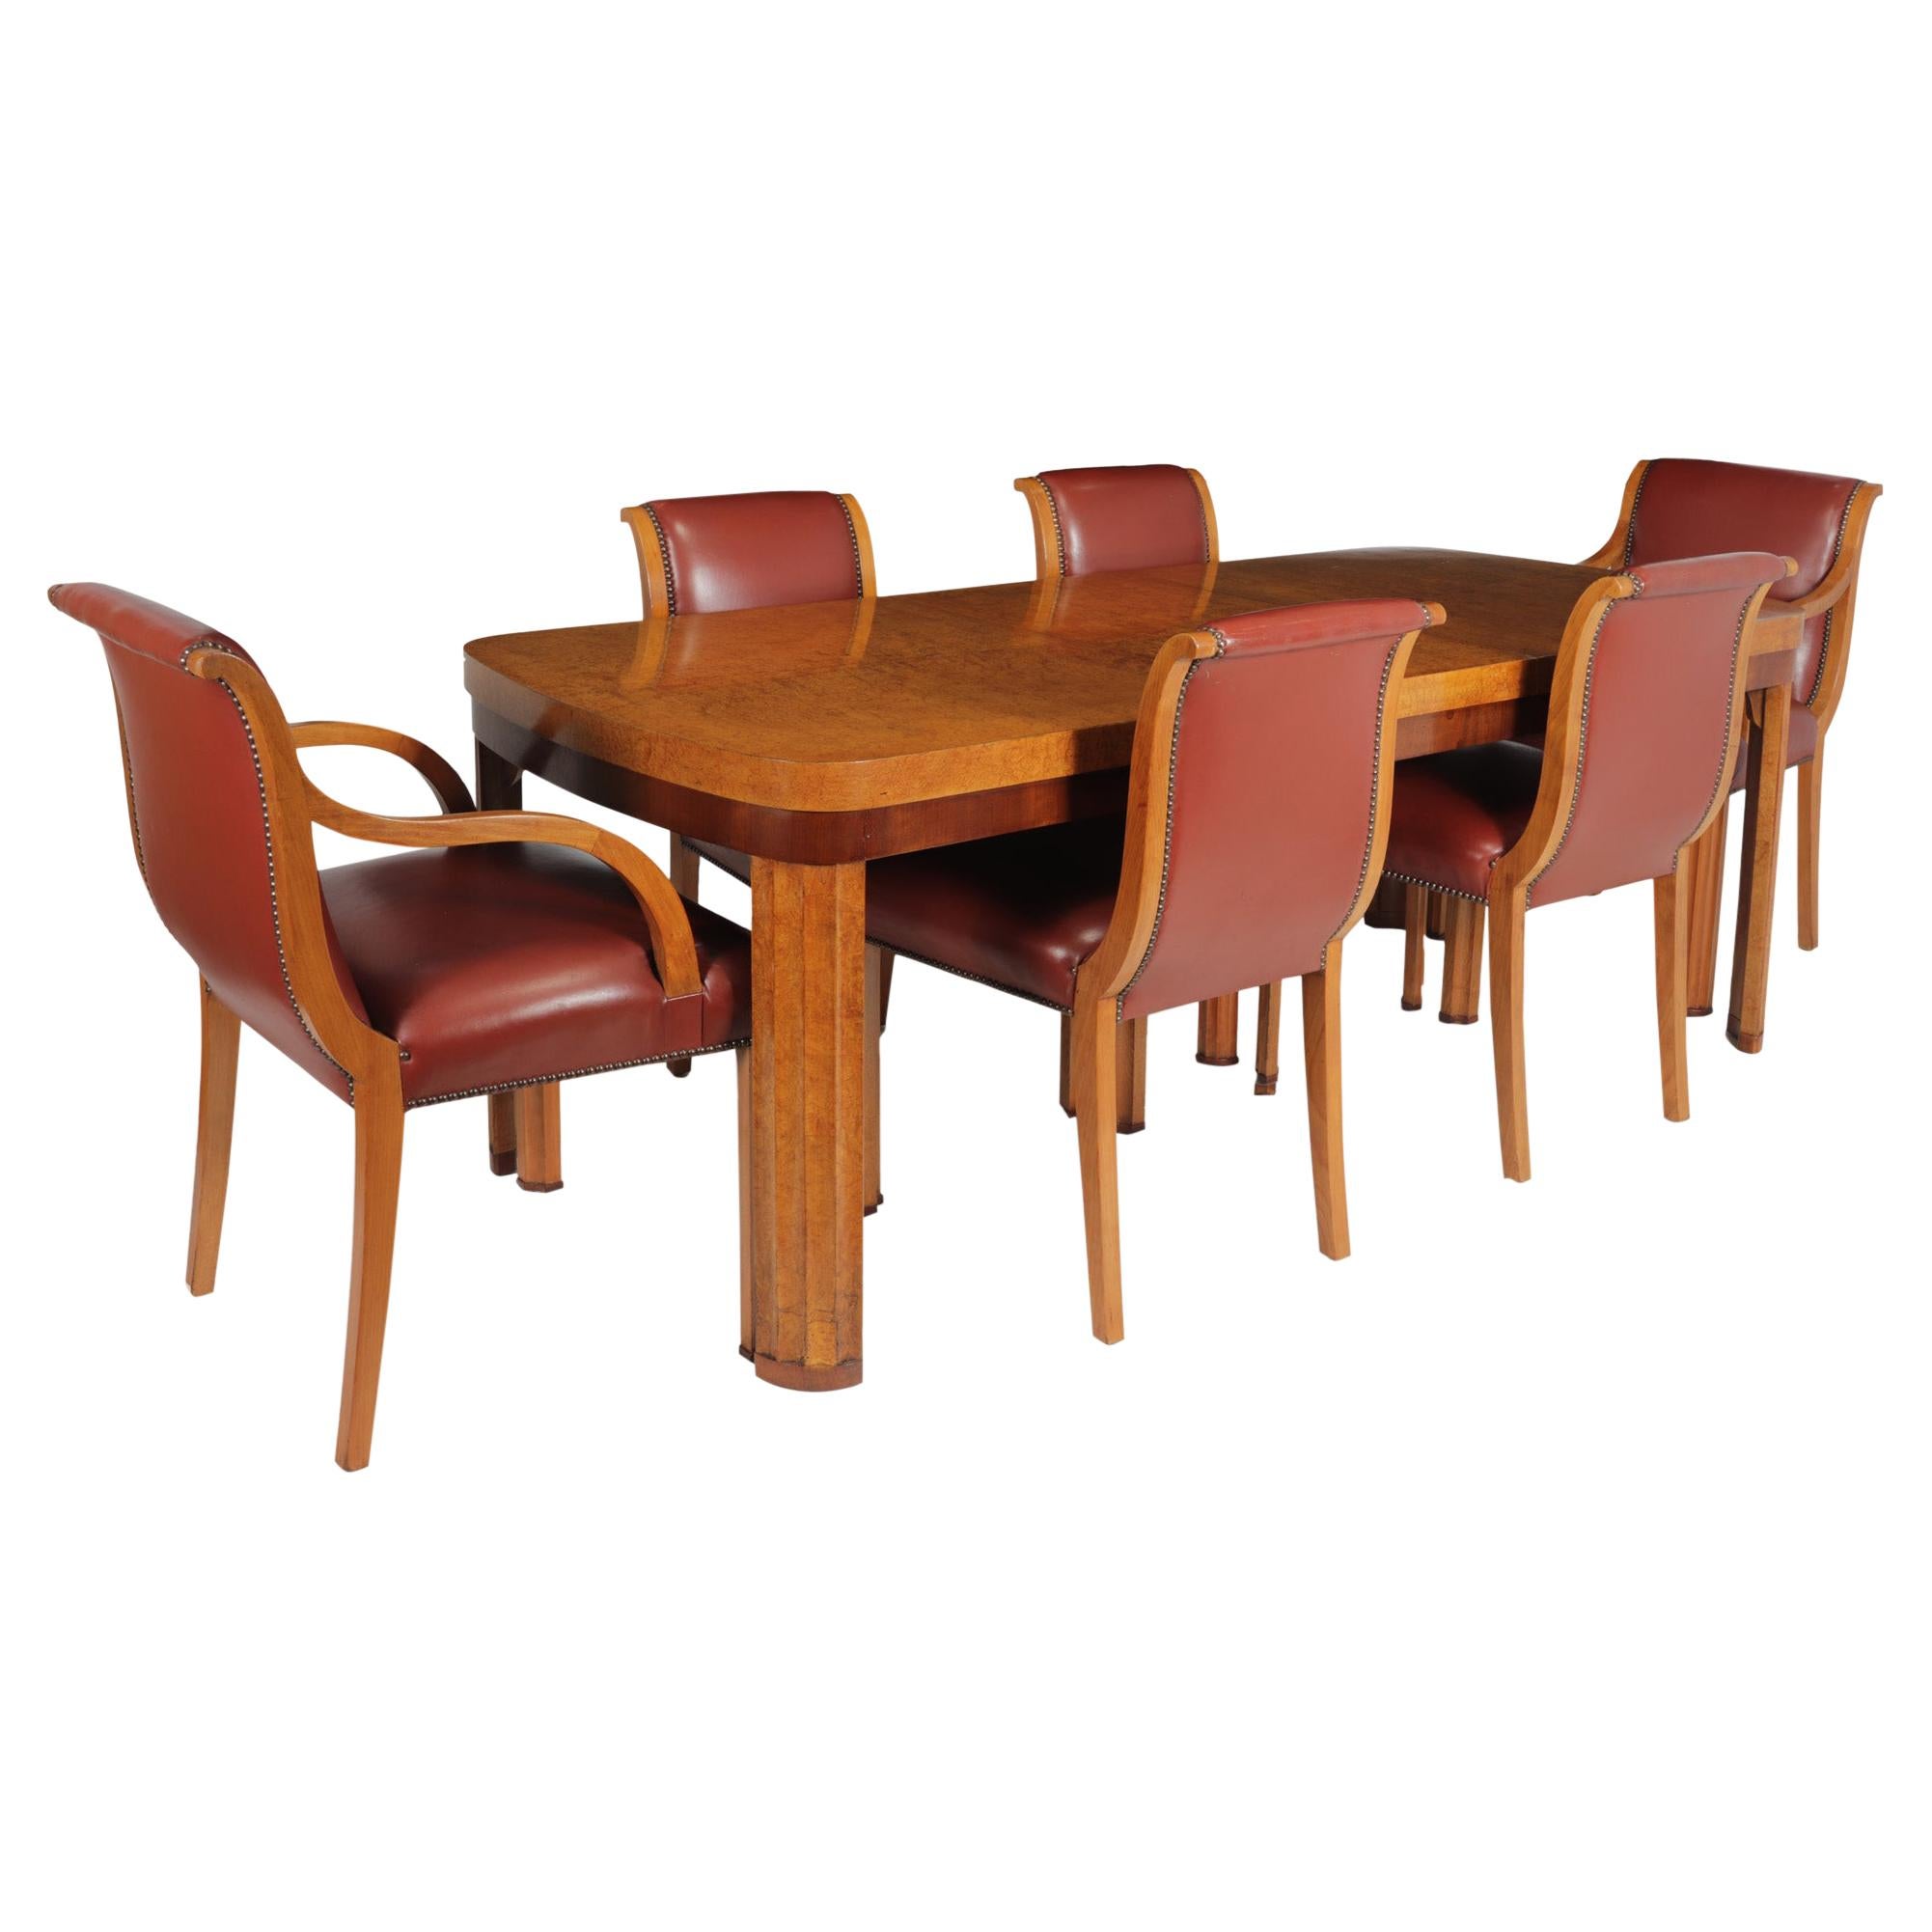 English Art Deco Dining Table and Chairs, c 1930